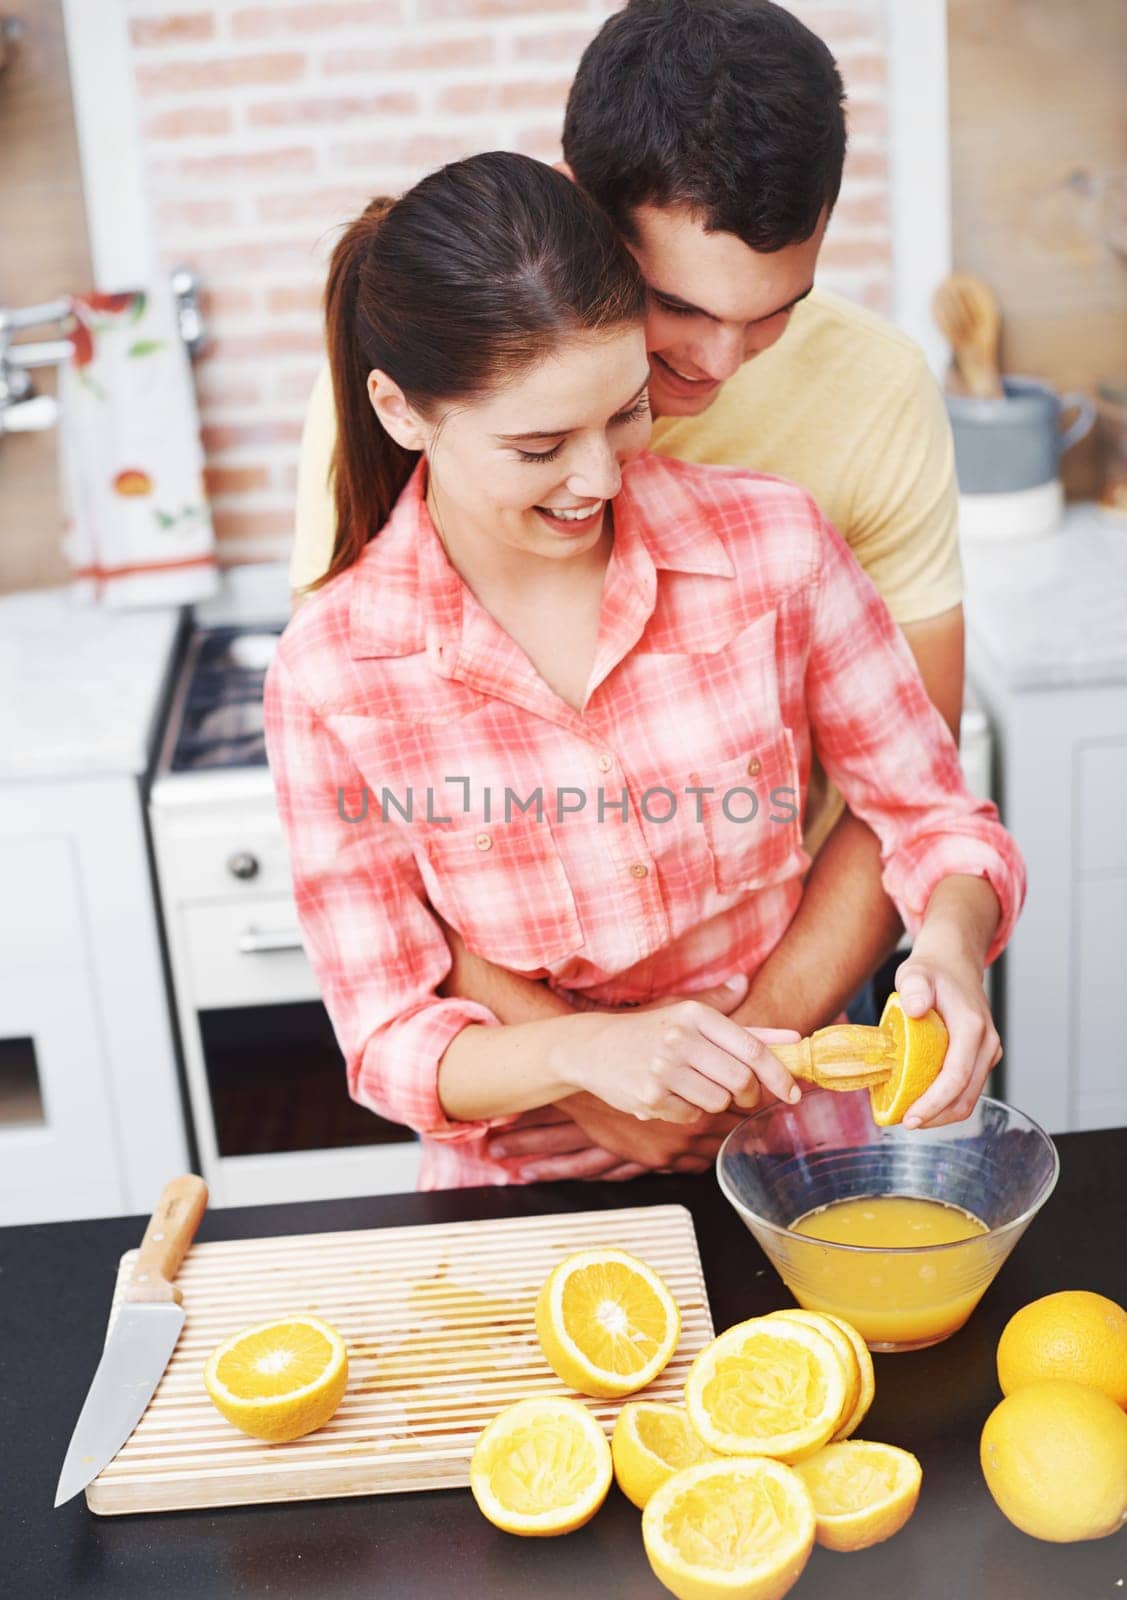 Couple, kitchen and happy with orange for juice in bowl for health, nutrition and diet with ingredients. Home, relationship and bonding with fruit for sweet flavor or lunch snack and fresh food.